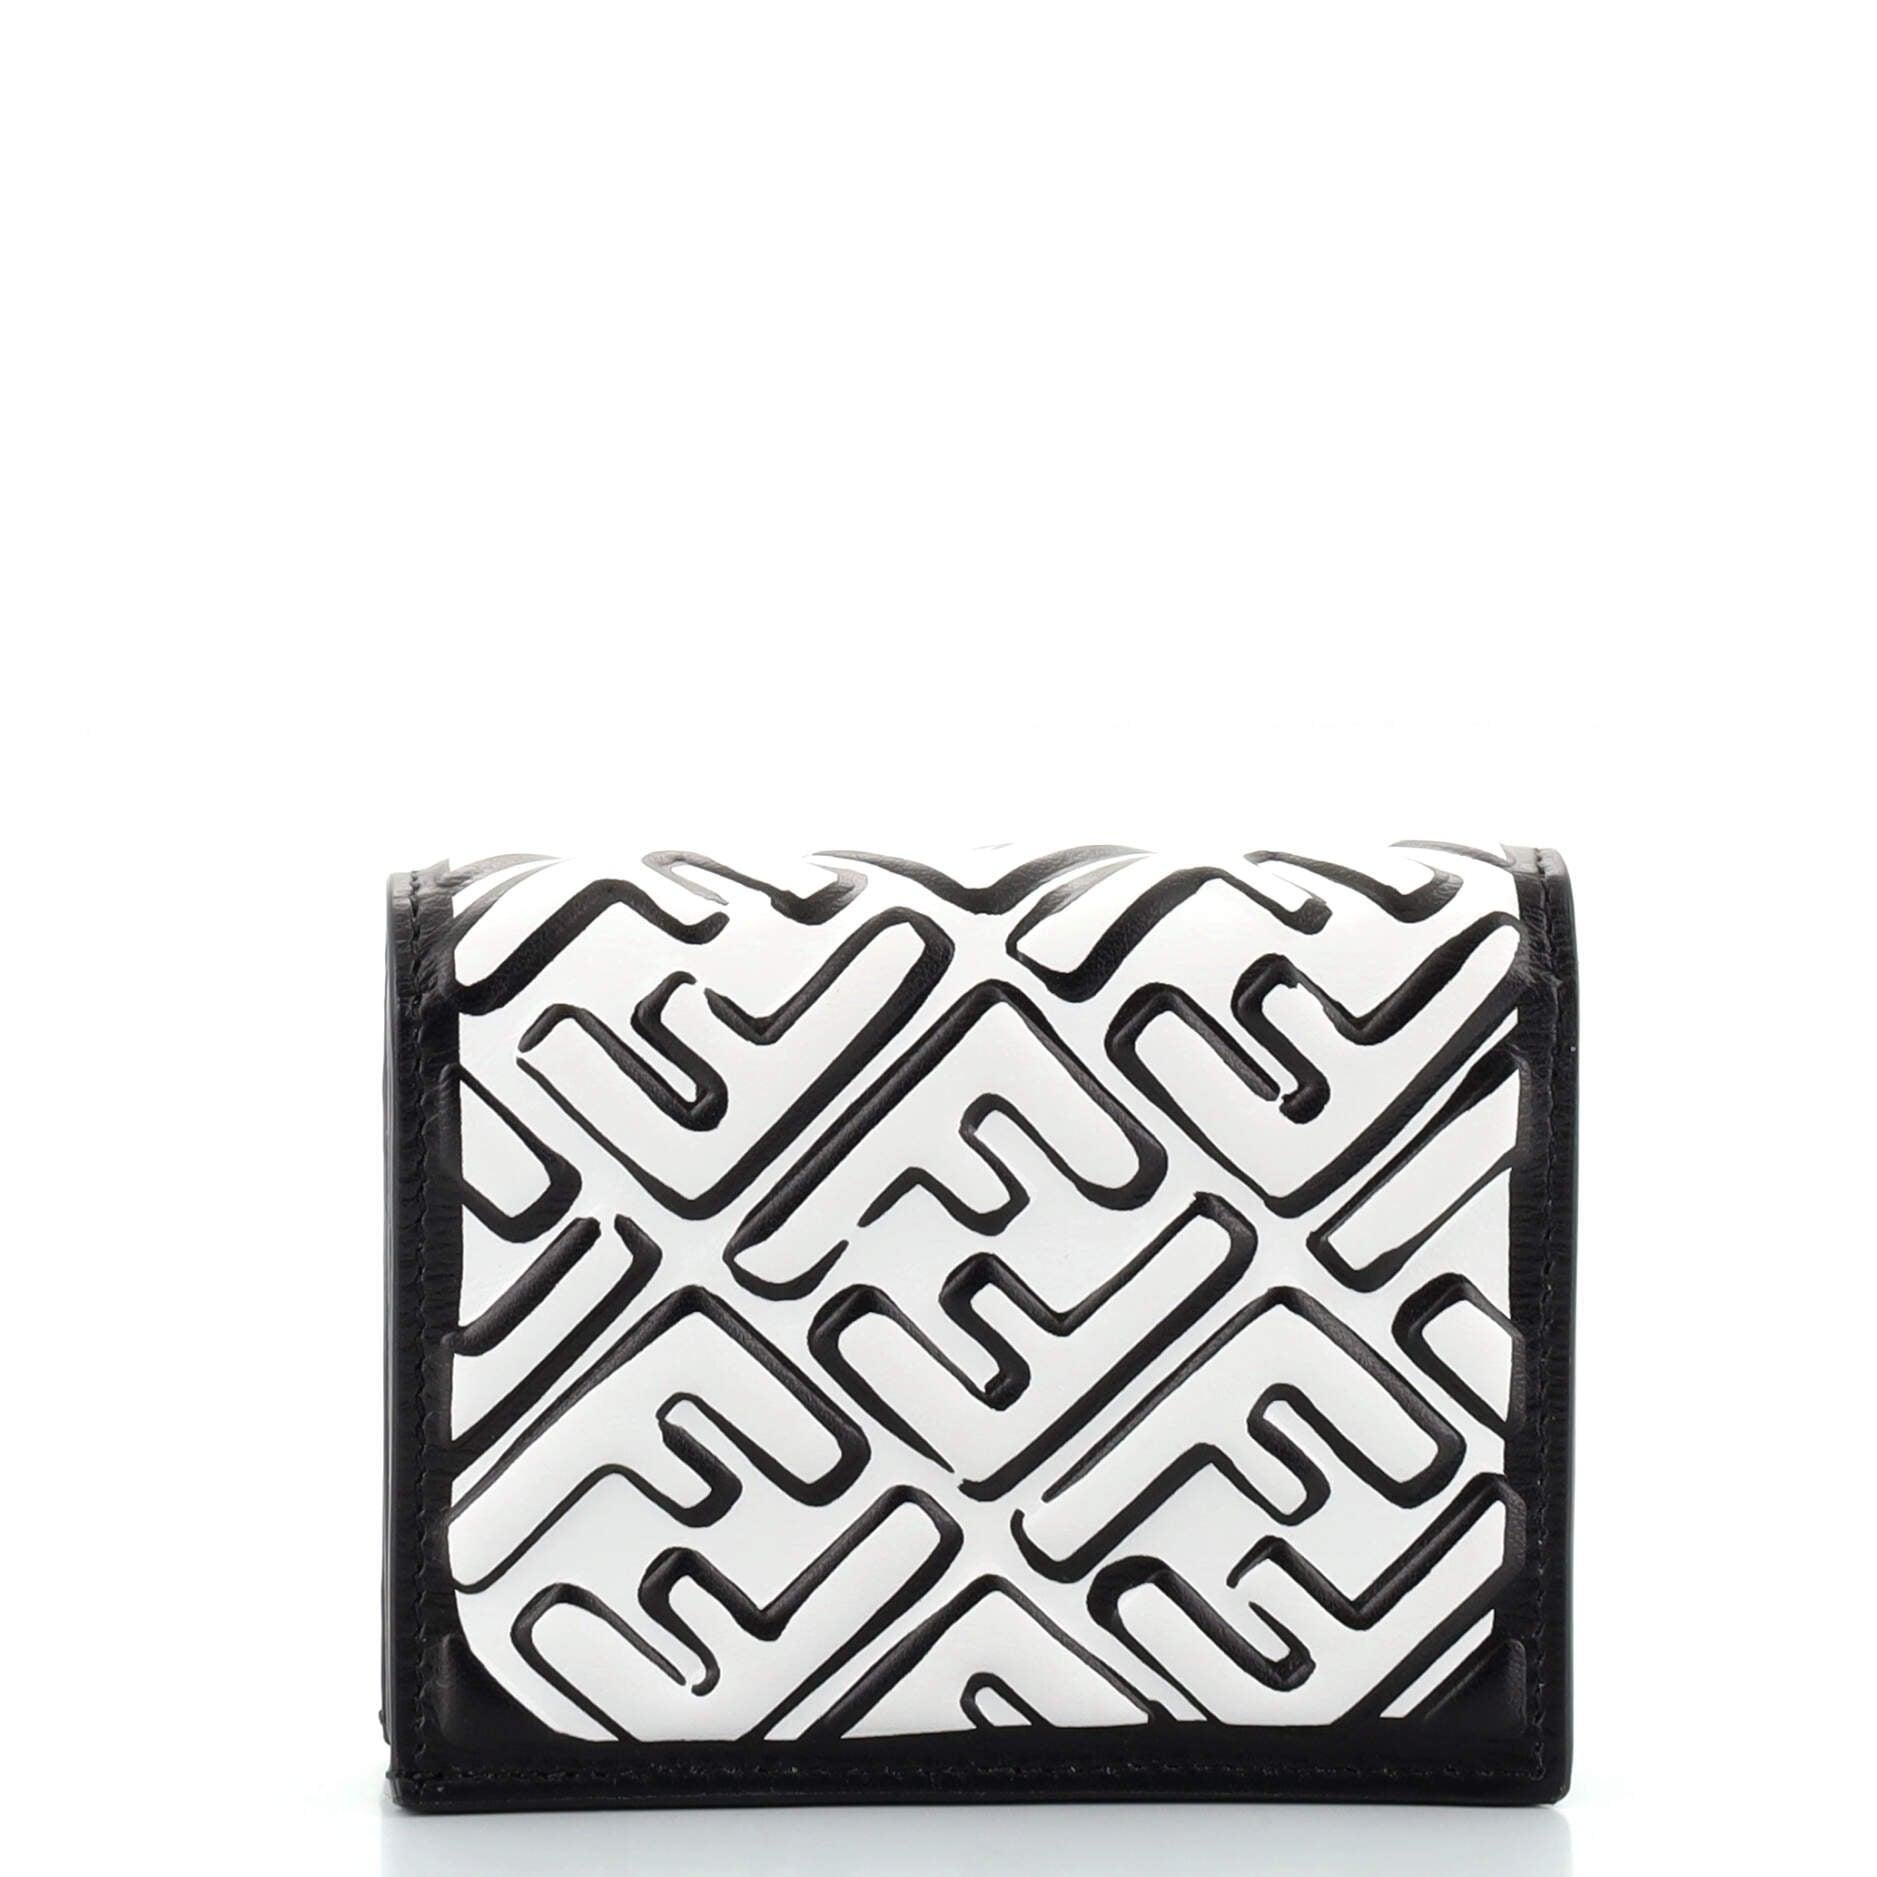 Fendi x Joshua Vibes Black White FF Embossed Printed Zucca Leather Compact Bifold Wallet

Condition Details: Minimal wear on exterior, scratches on hardware.

68108MSC

Measurements: Height 3.5